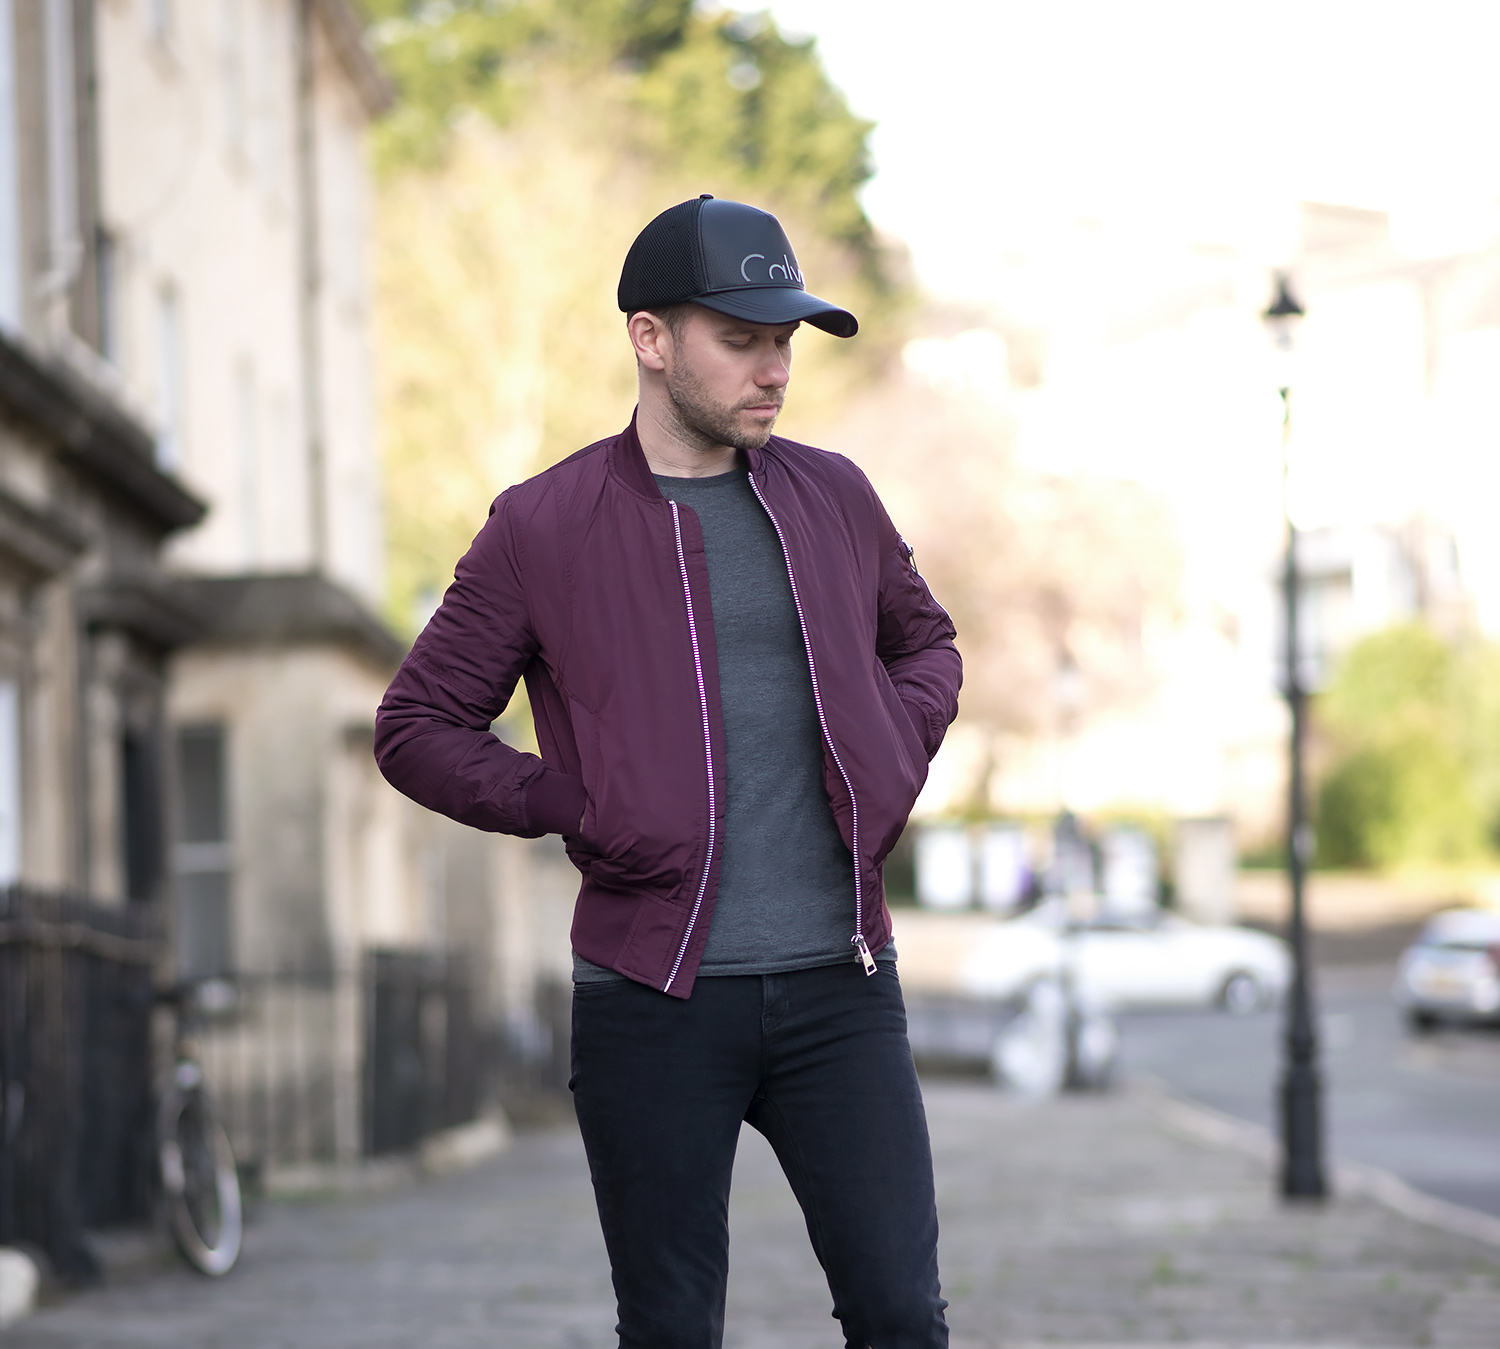 Calvin Klein Baseball Cap And Burgundy Bomber Jacket Outfit | Your ...